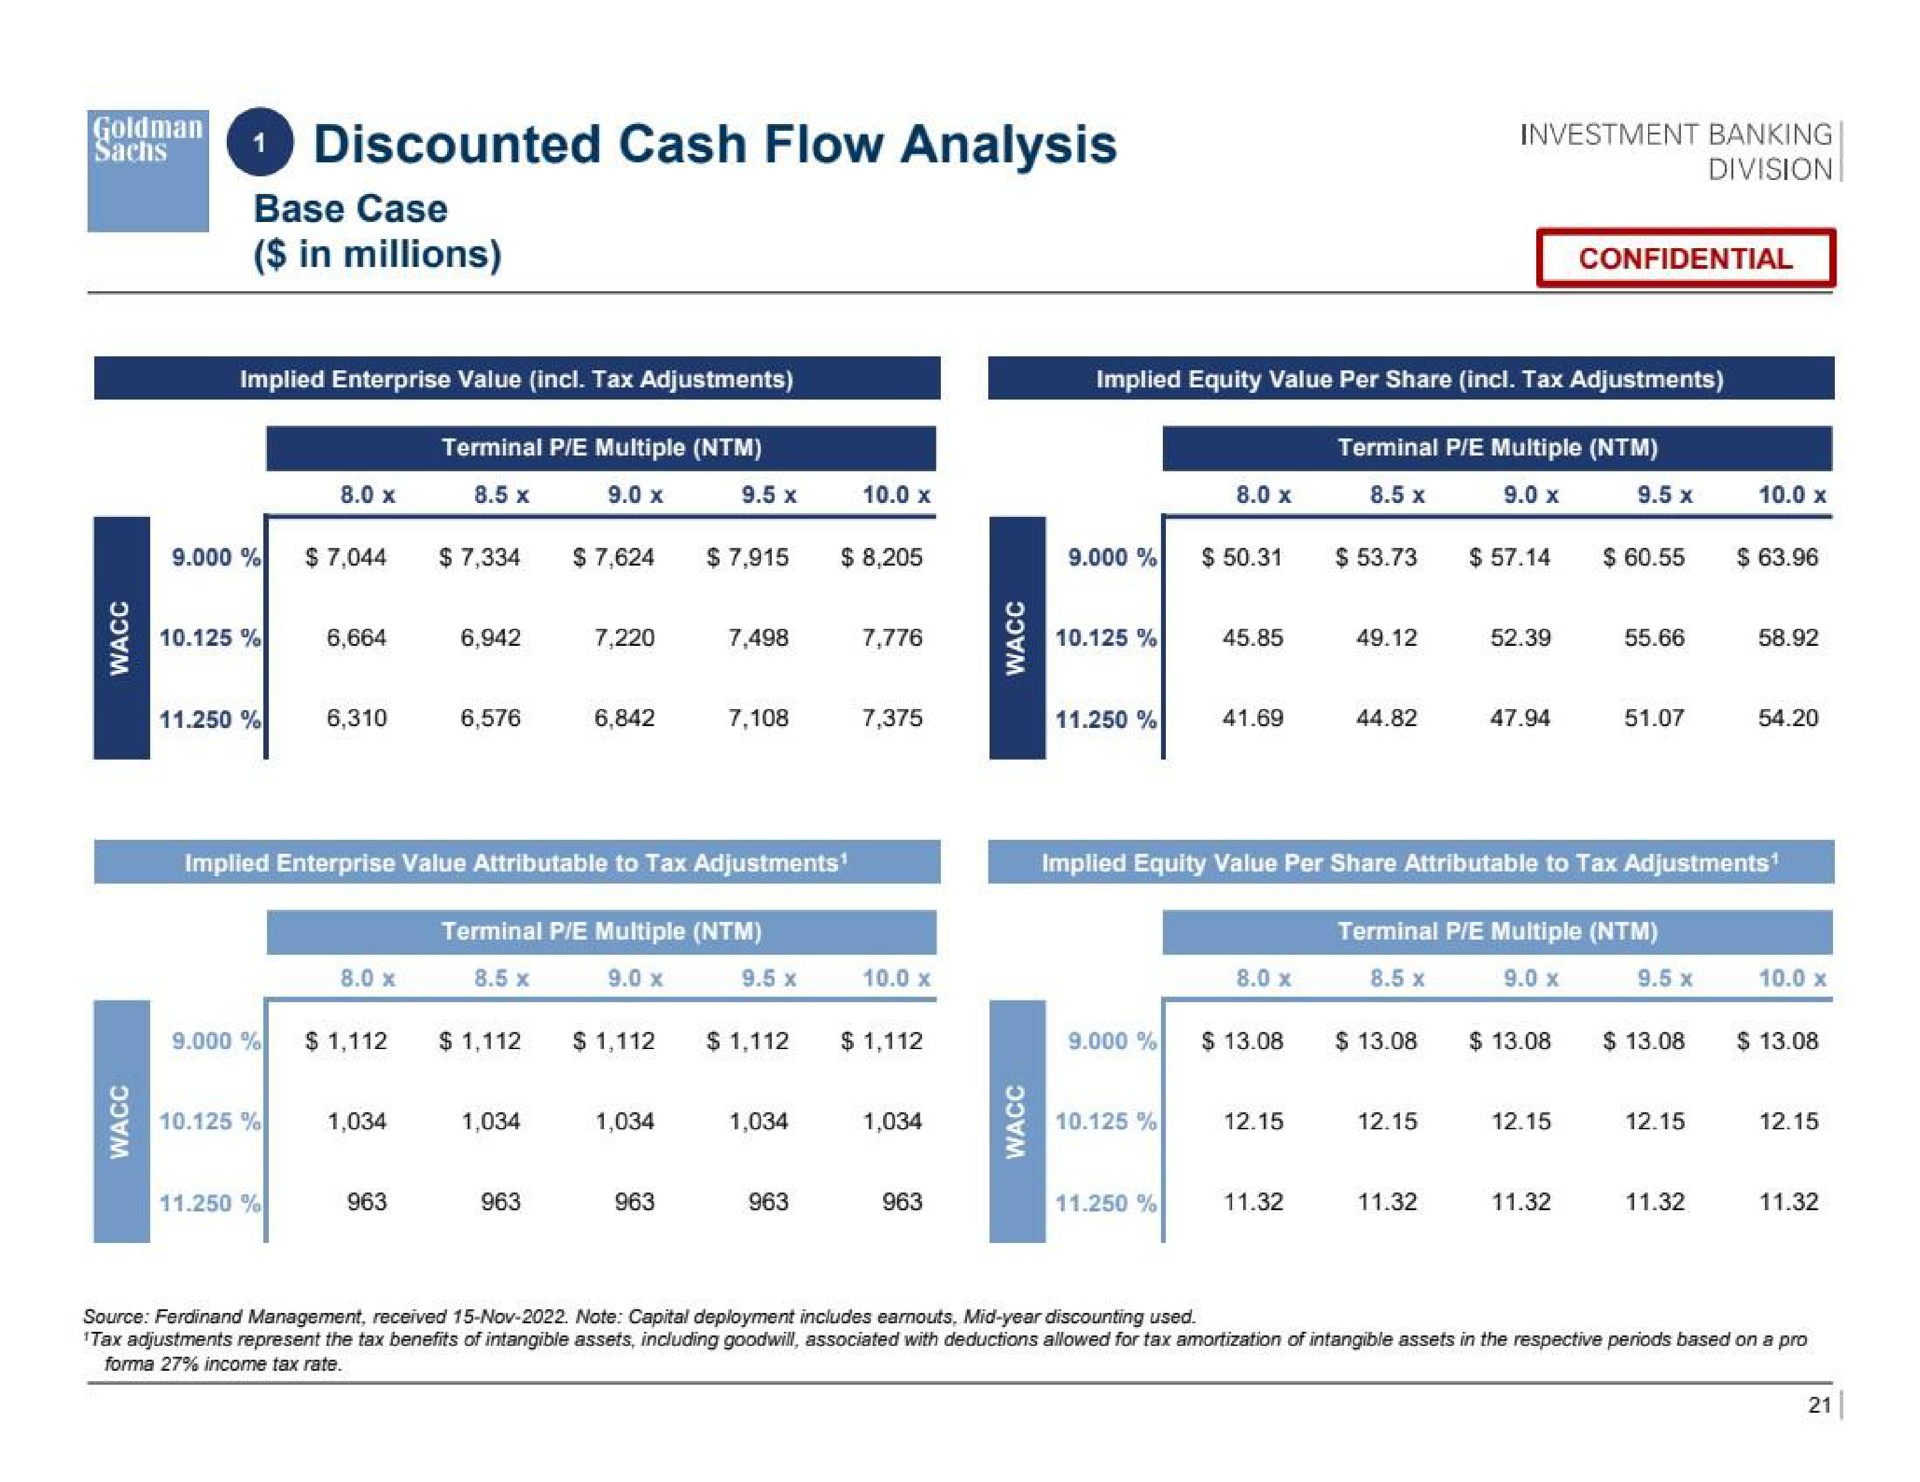 discounted cash flow analysis investment banking | Goldman Sachs